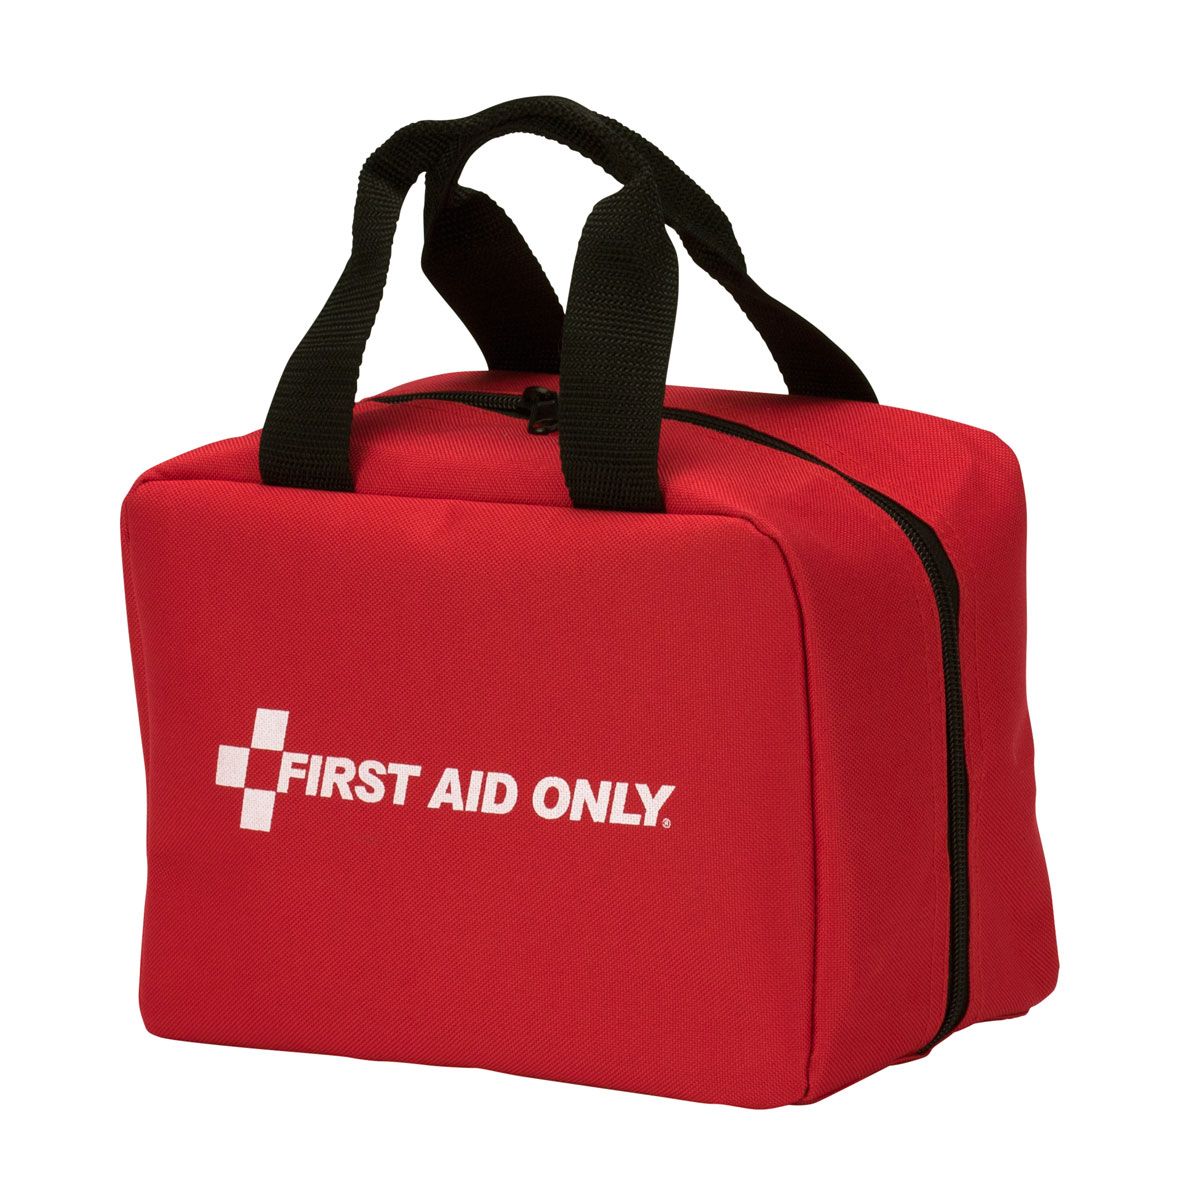 25 Person Bulk Fabric First Aid Kit, ANSI Compliant - W-90594